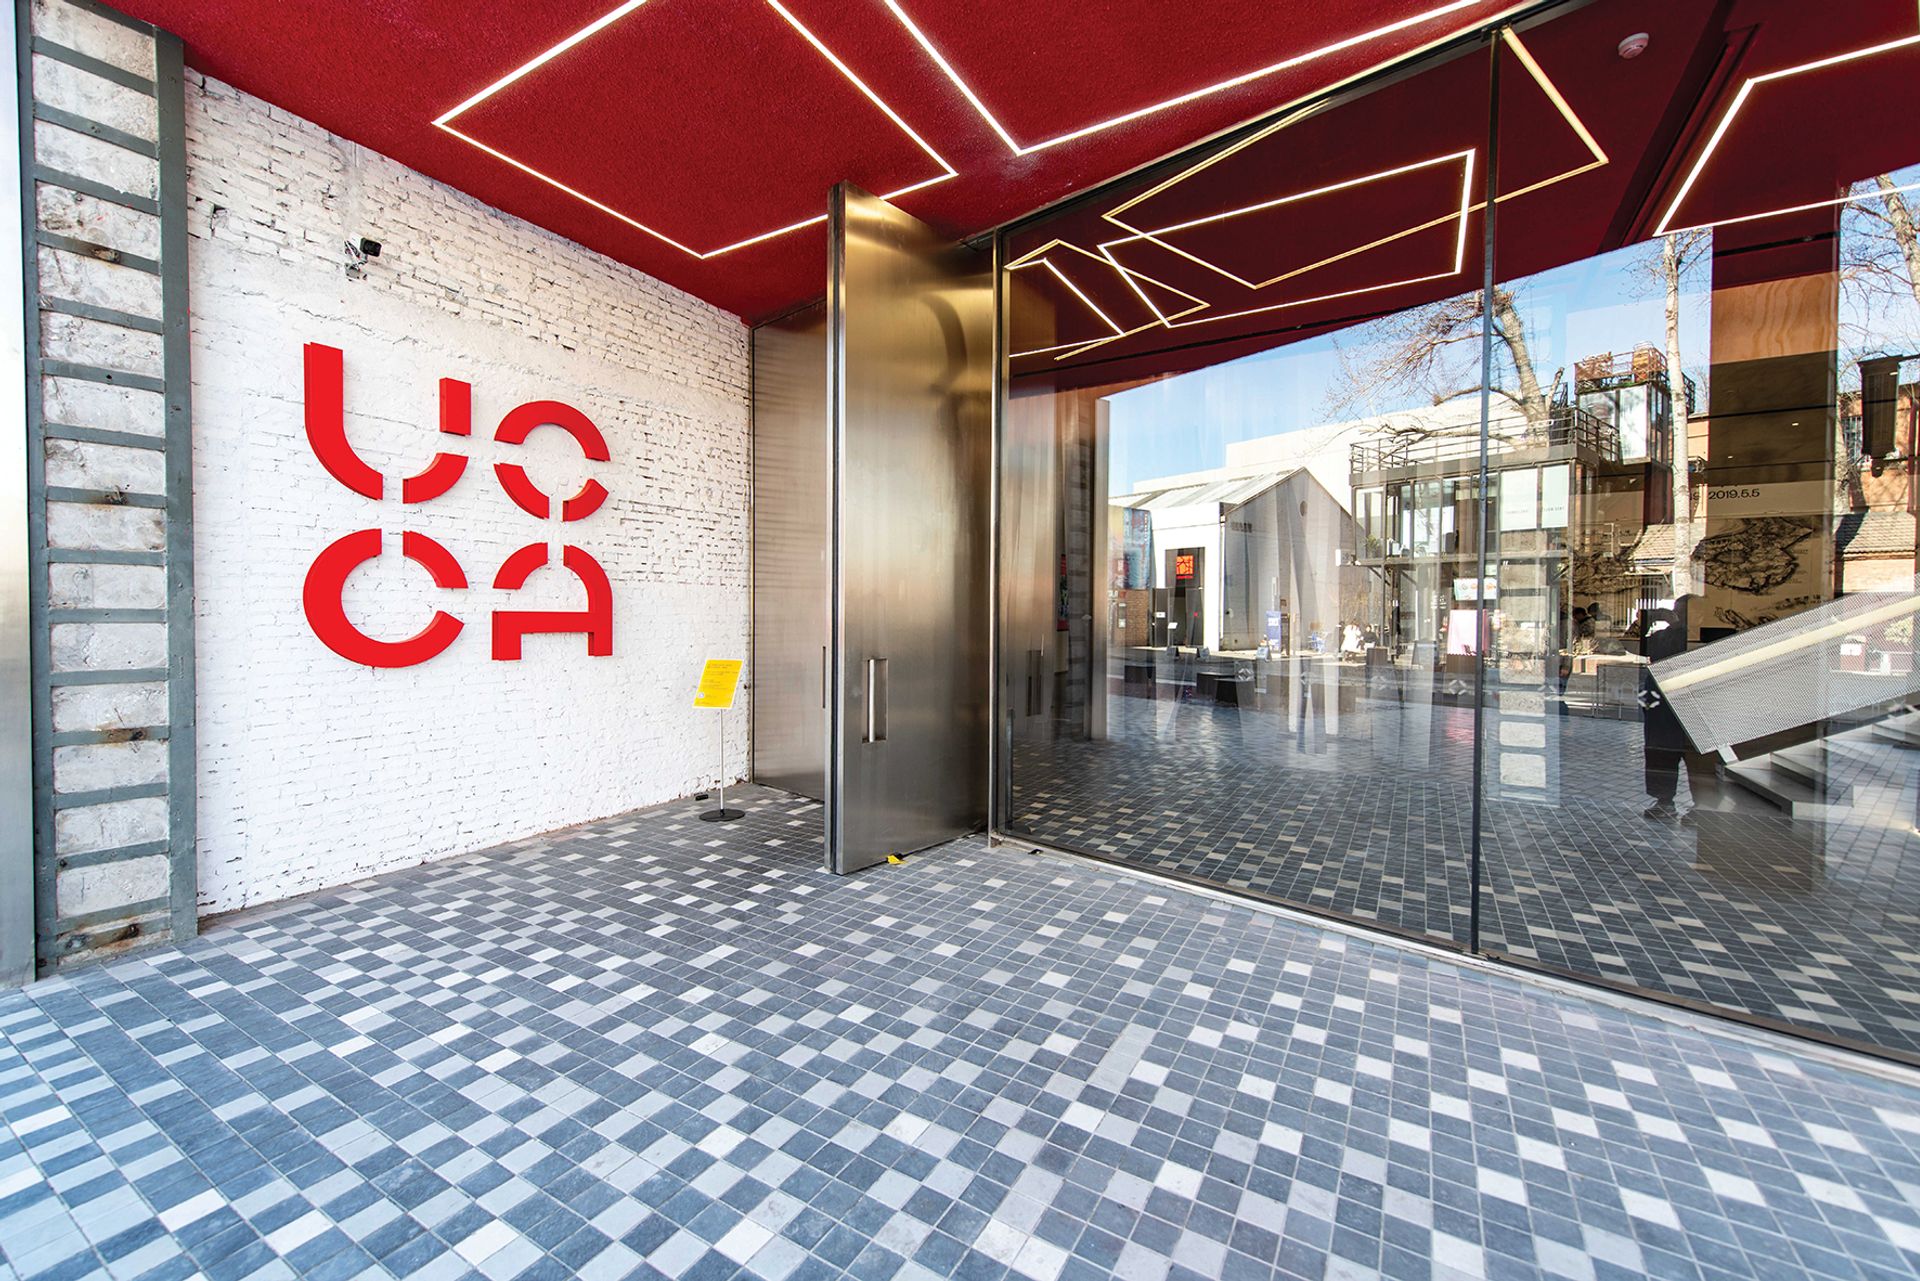 The entrance of UCCA Courtesy of the Office for Metropolian Architecture; photo: Bian Jie